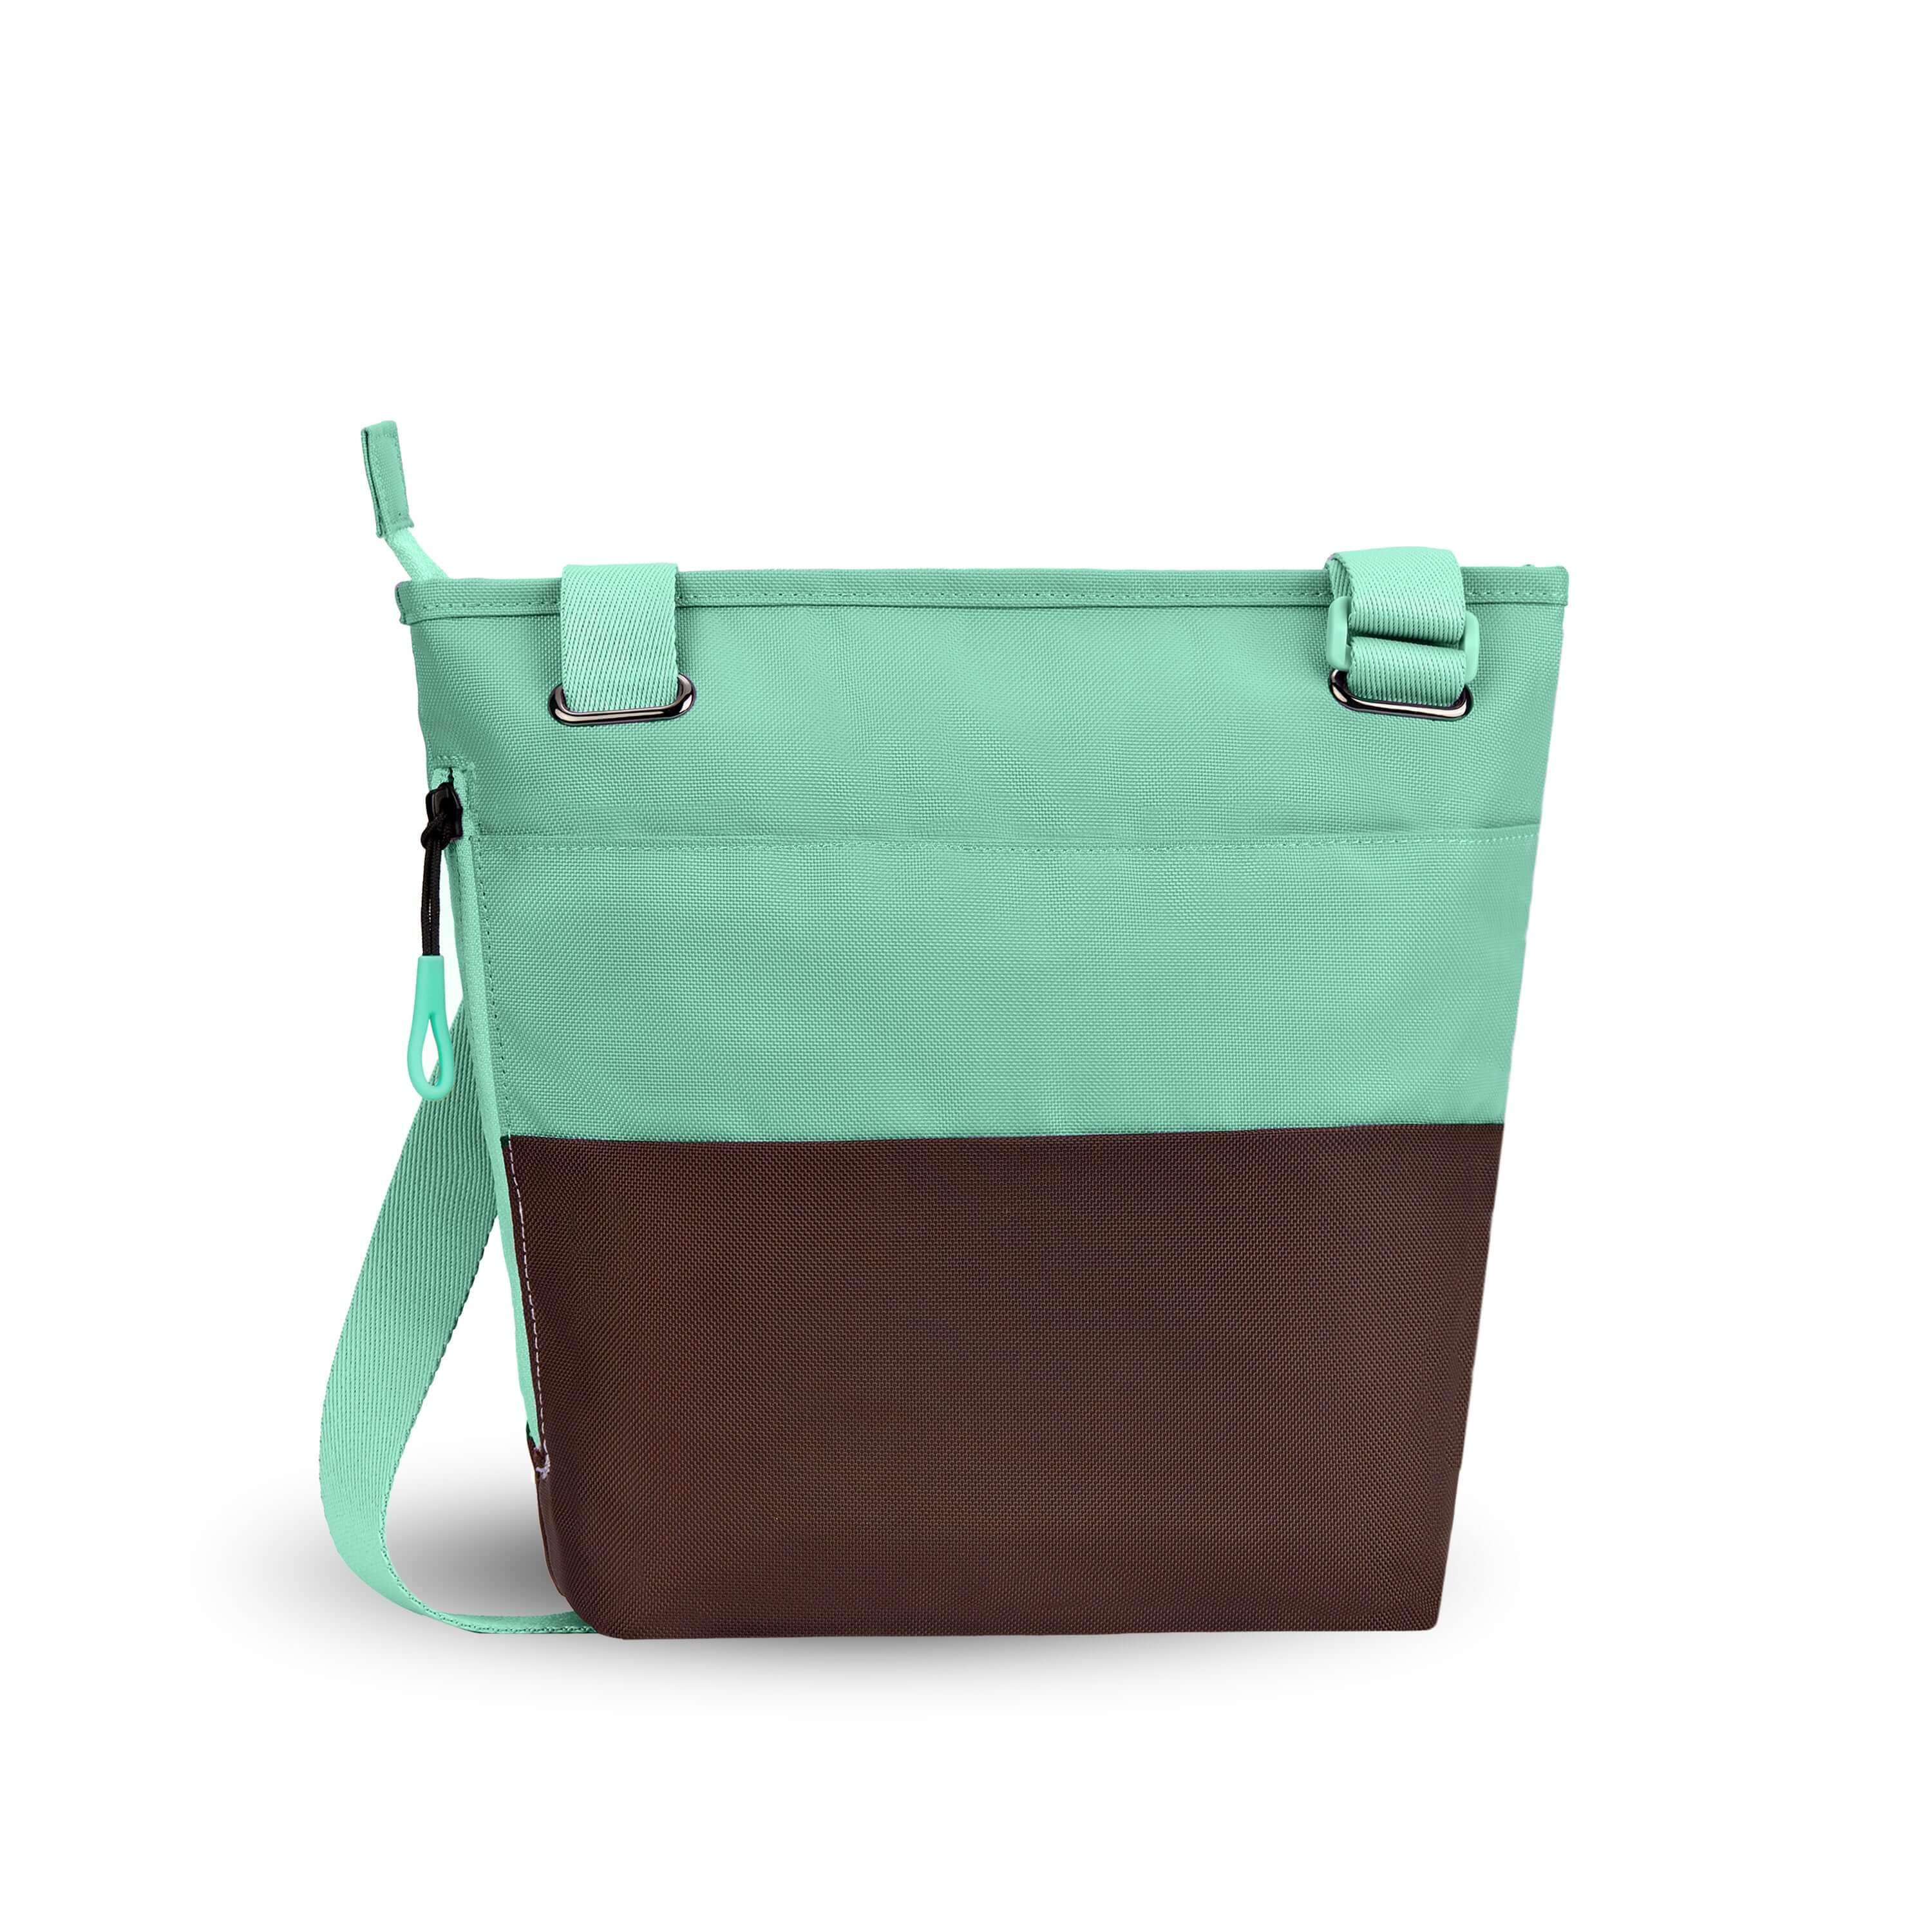 Top view of Sherpani’s crossbody, the Sadie, in Seagreen. The top half of the bag is light green and the bottom half of the bag is brown. There is an external pocket on the back. A zipper pocket sits on one side with an easy-pull zipper that is accented in light green. The bag has an adjustable crossbody strap. 